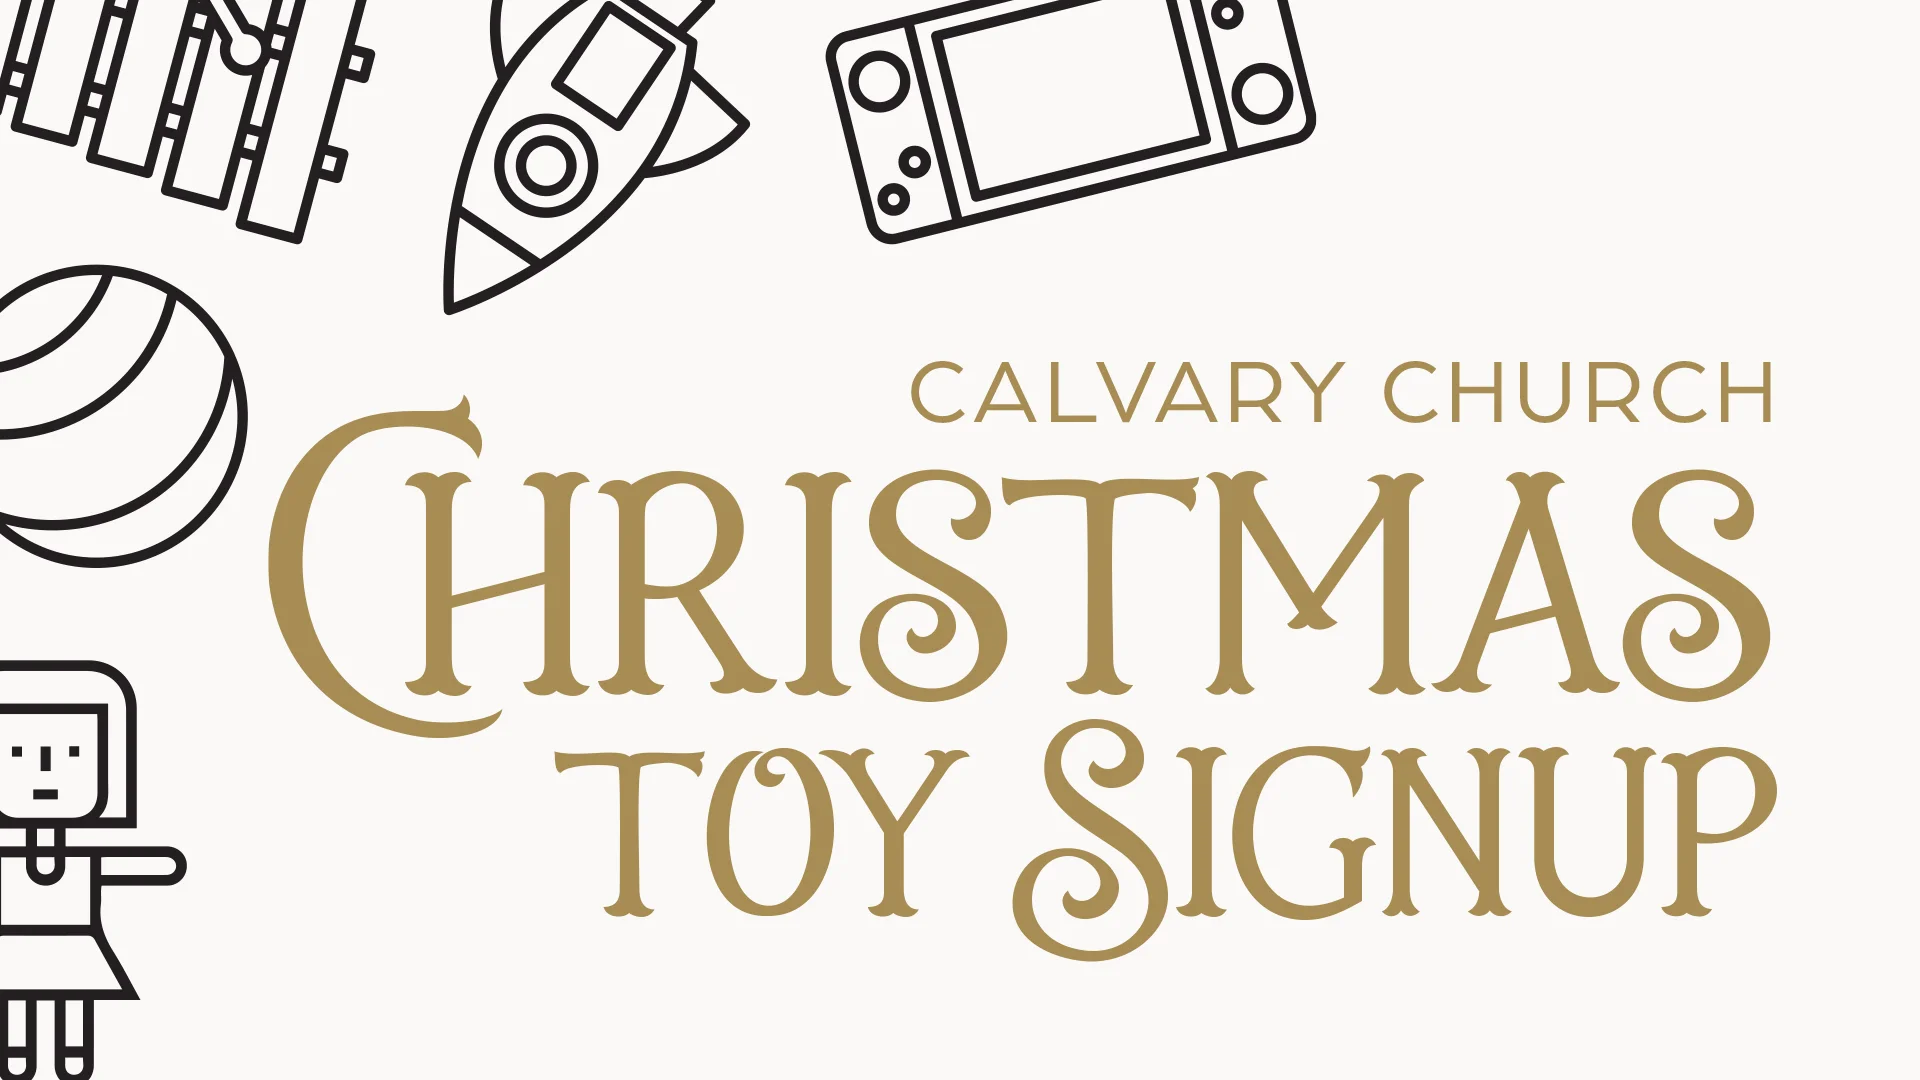 Calvary Church Christmas Toy Signup